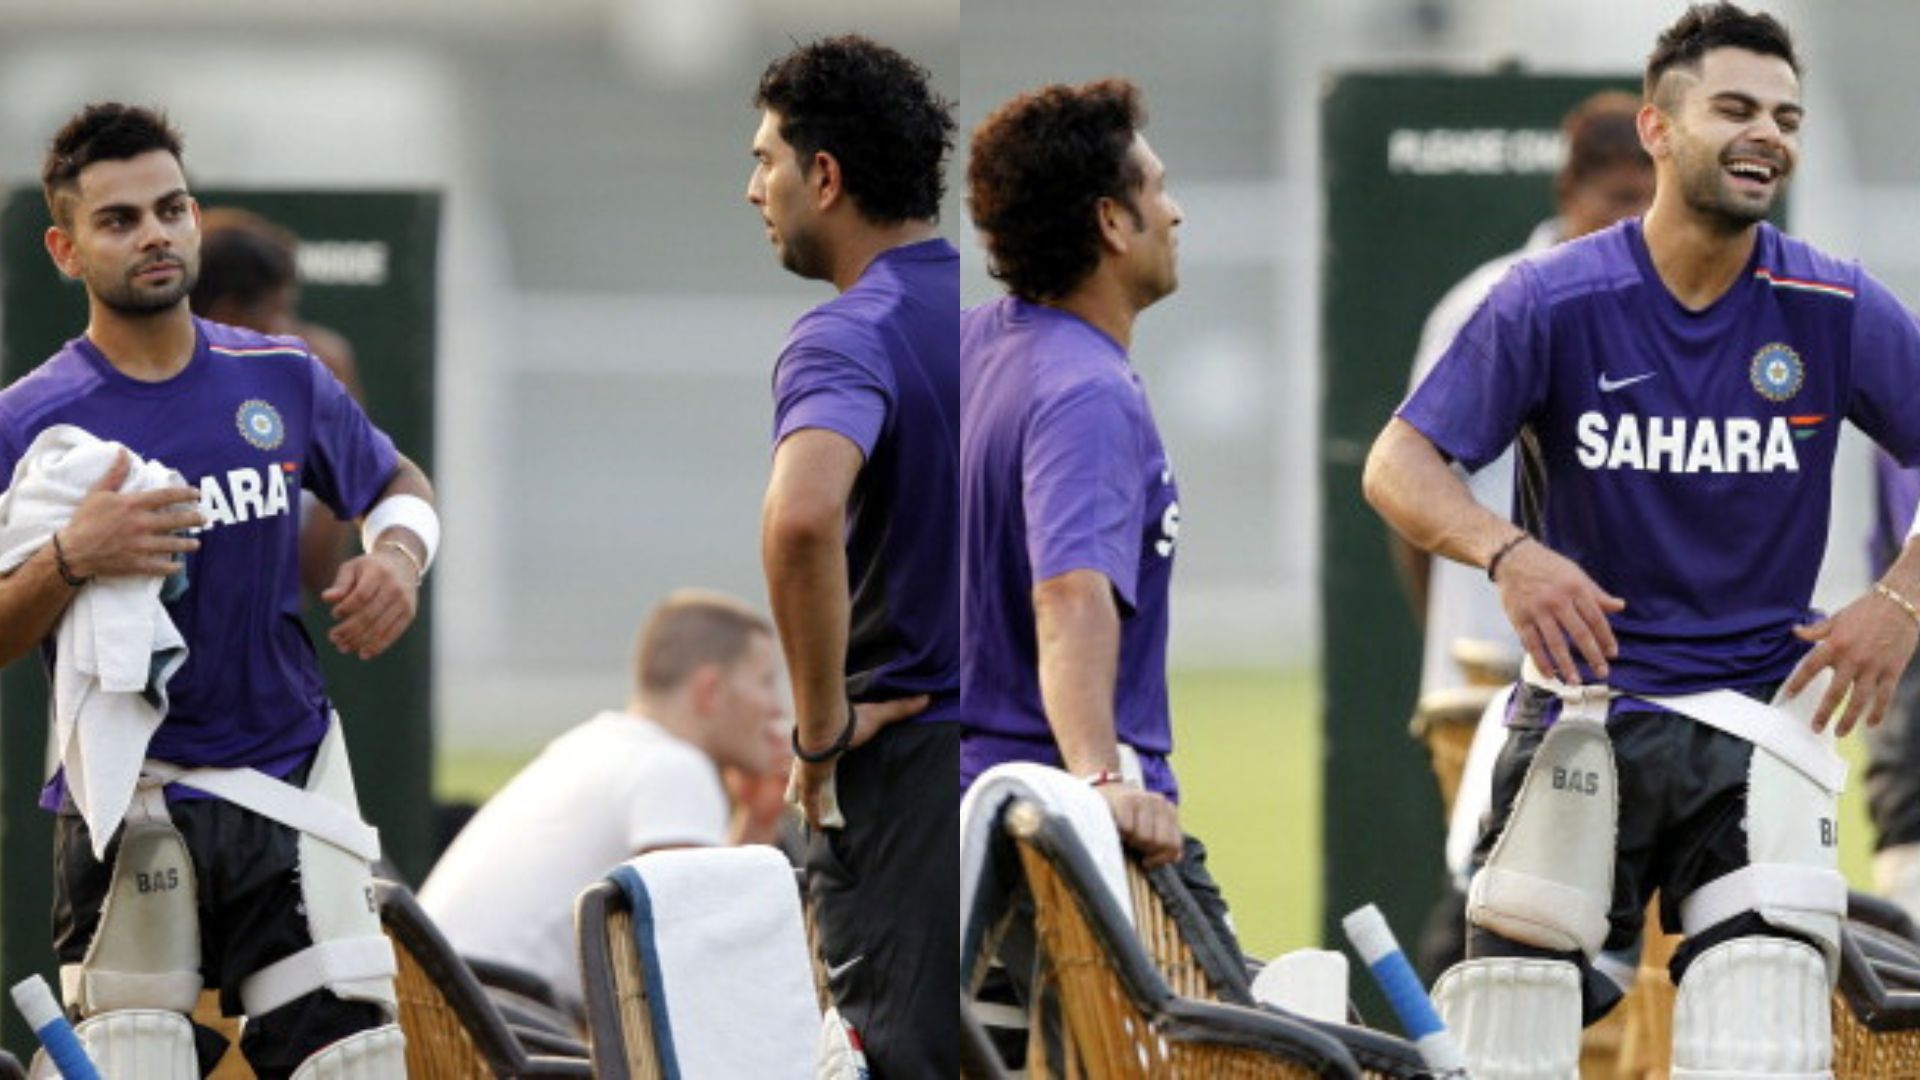 Kohli spent a great time with Tendulkar when they played for India together. (P.C.:BCCI)